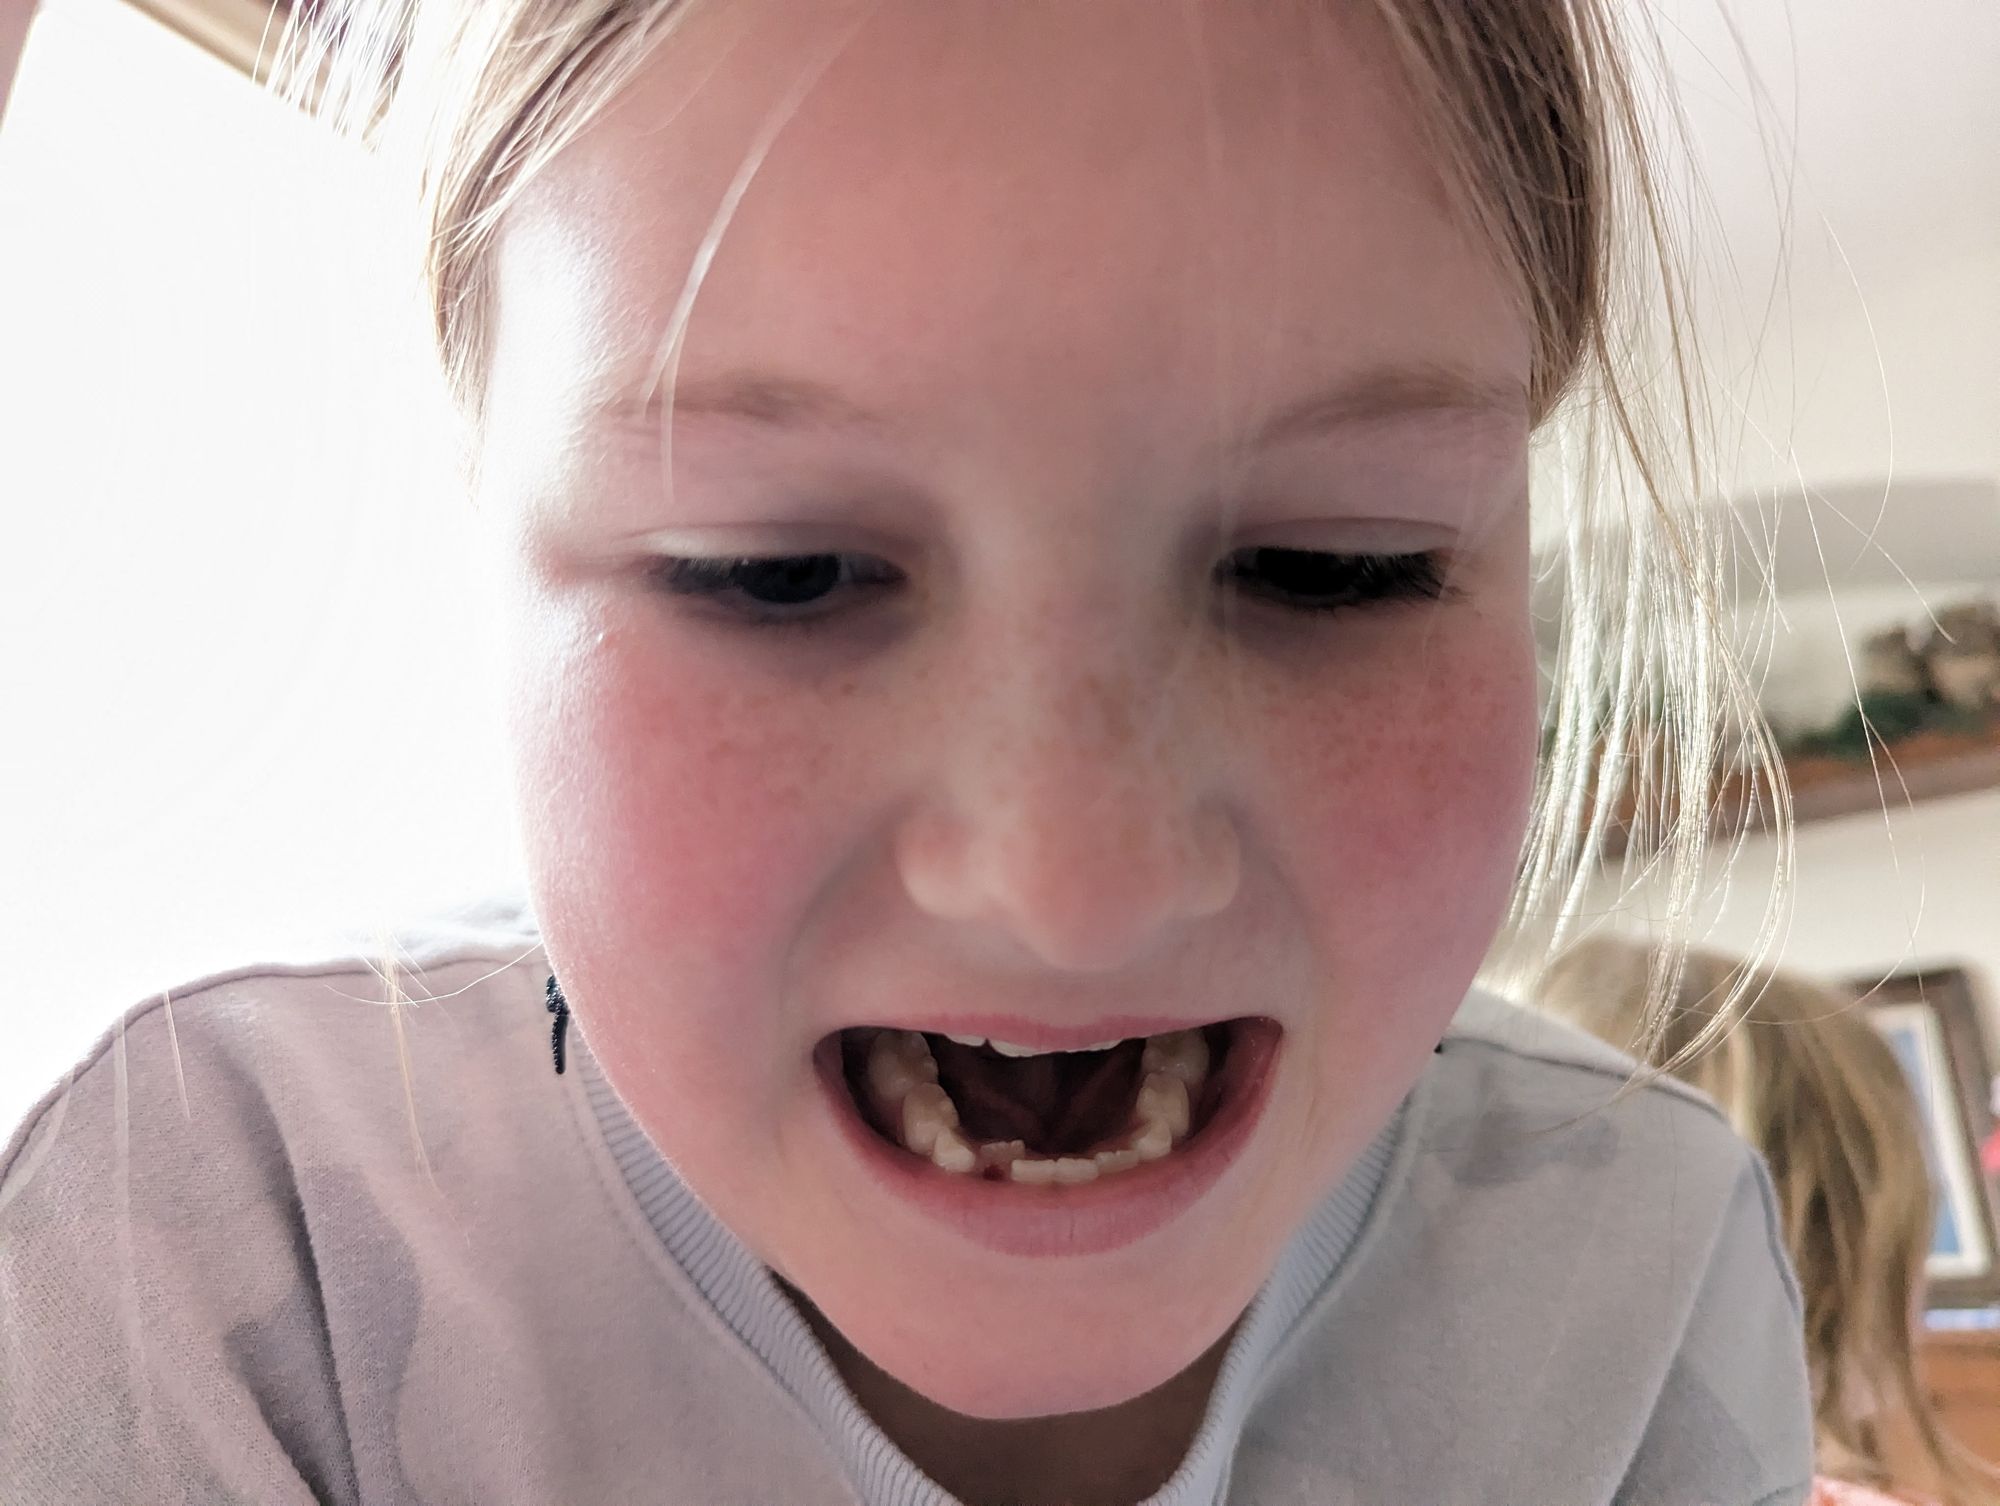 tooth fairy?